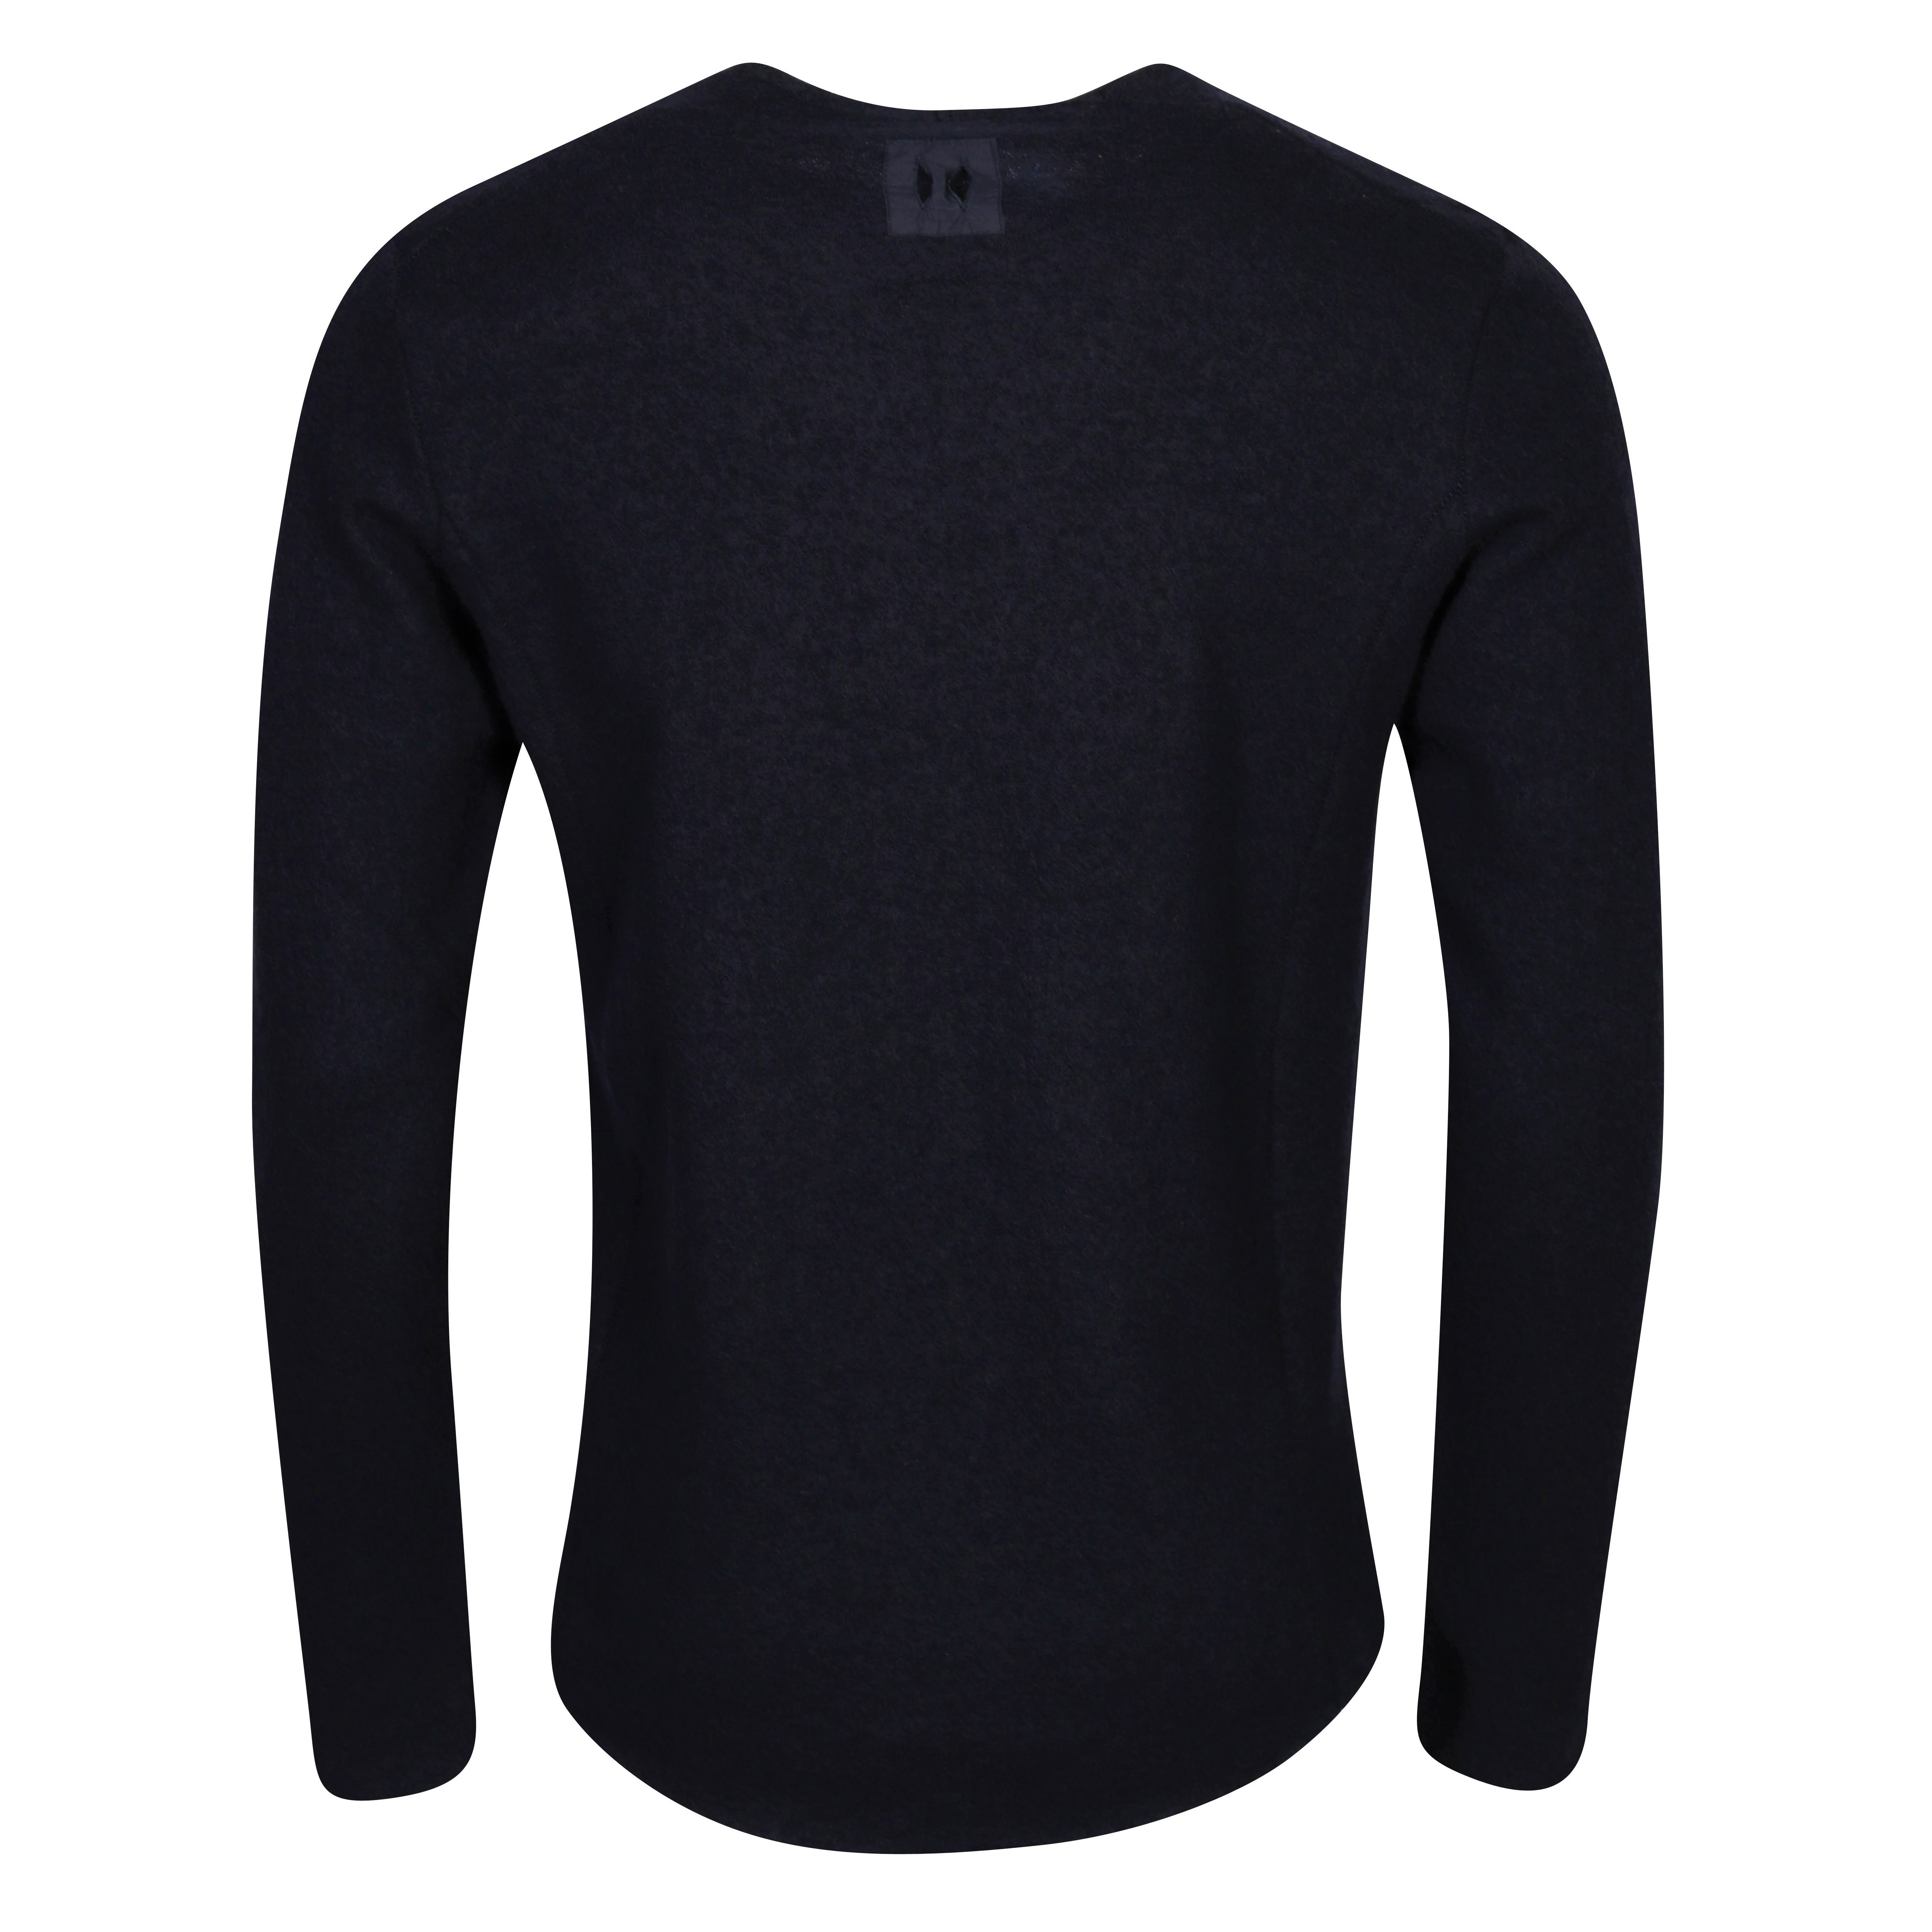 Hannes Roether Knit Pullover in Tornado